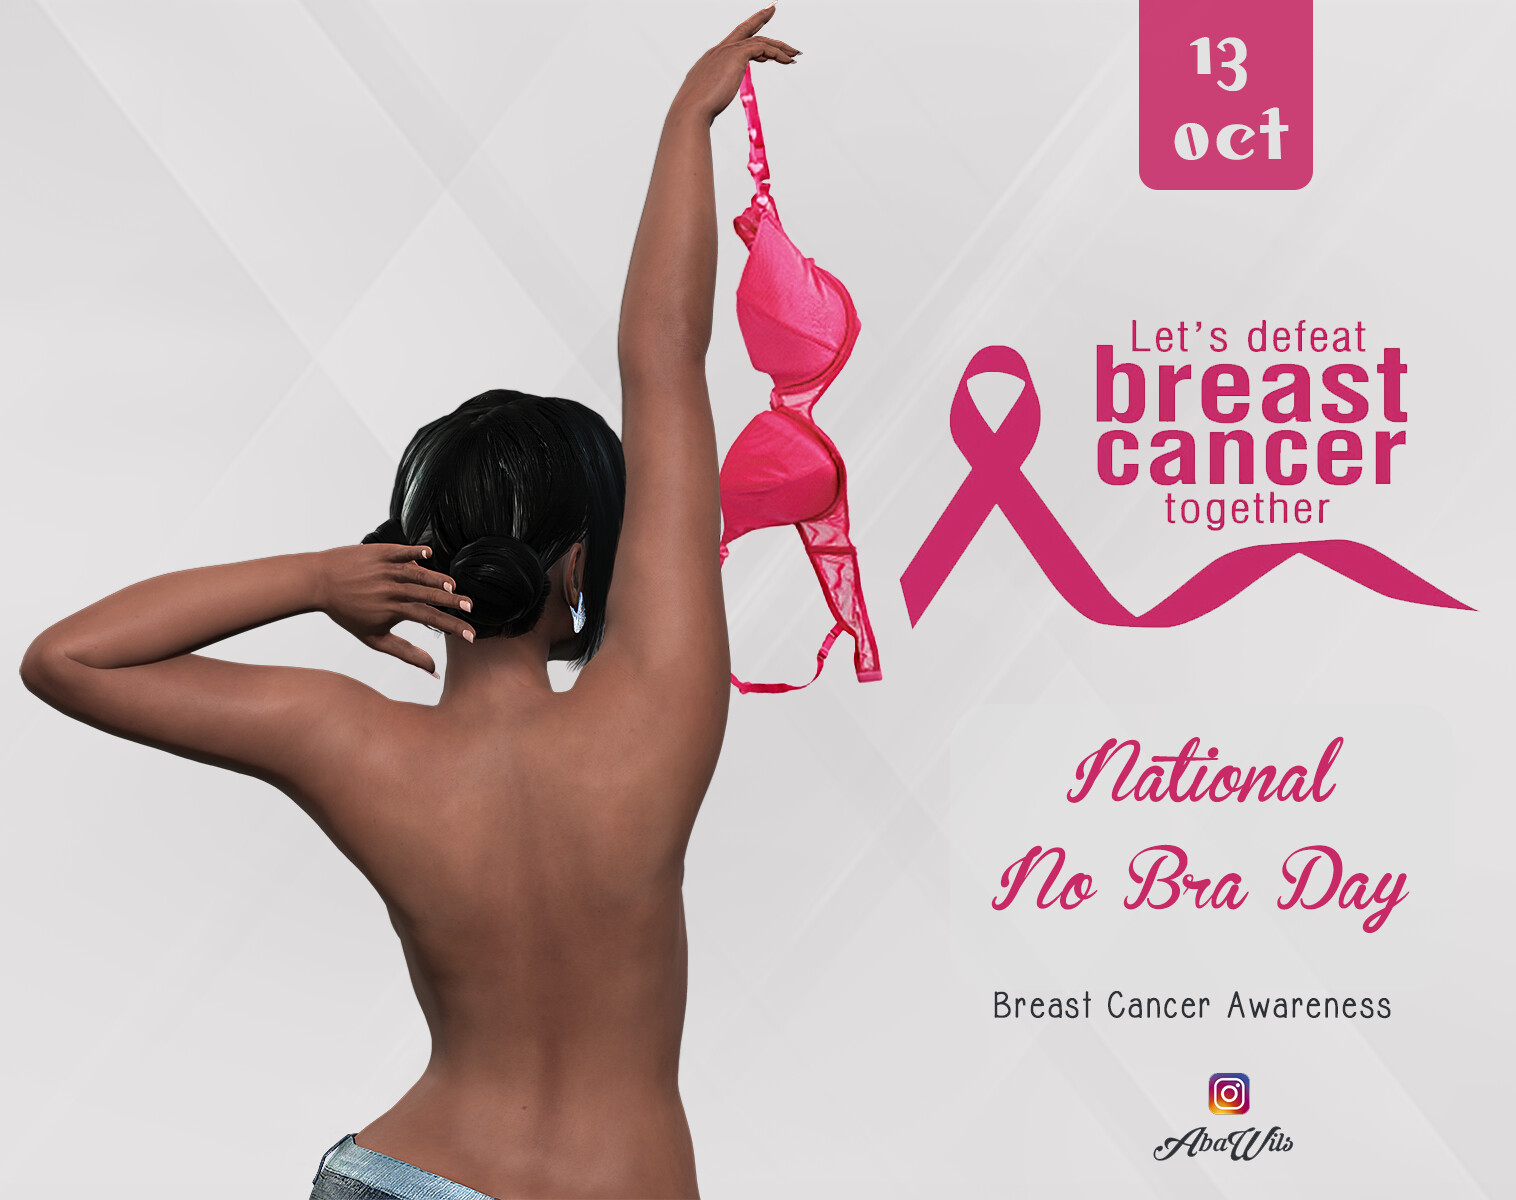 No bra day: Women ditched bras for breast cancer awareness - Yahoo Sports